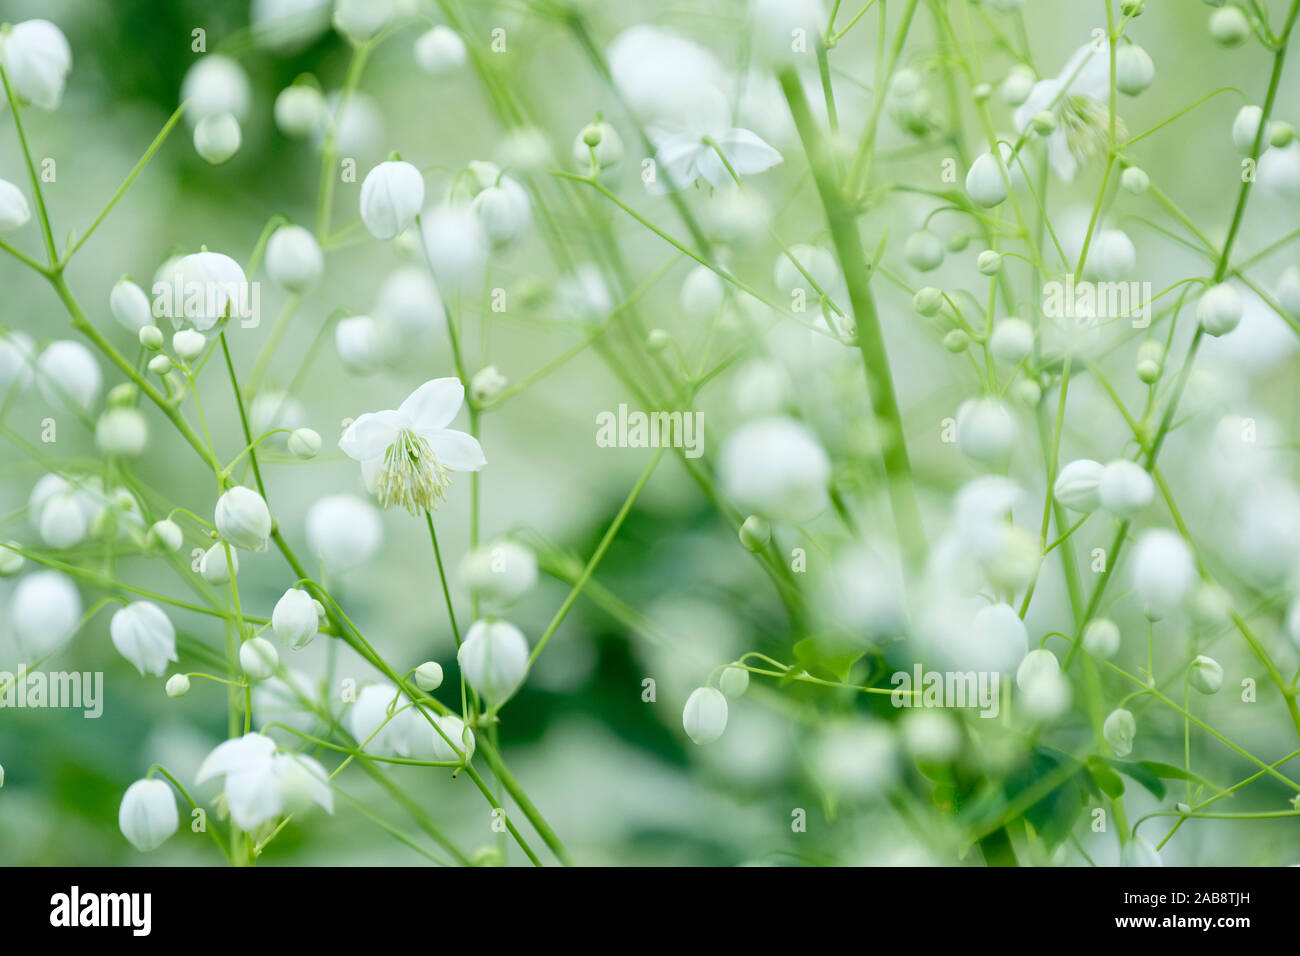 Close up of small white flowers of Thalictrum 'Splendide White' also known as Thalictrum 'Splendide Album', Chinese Meadow rue Stock Photo